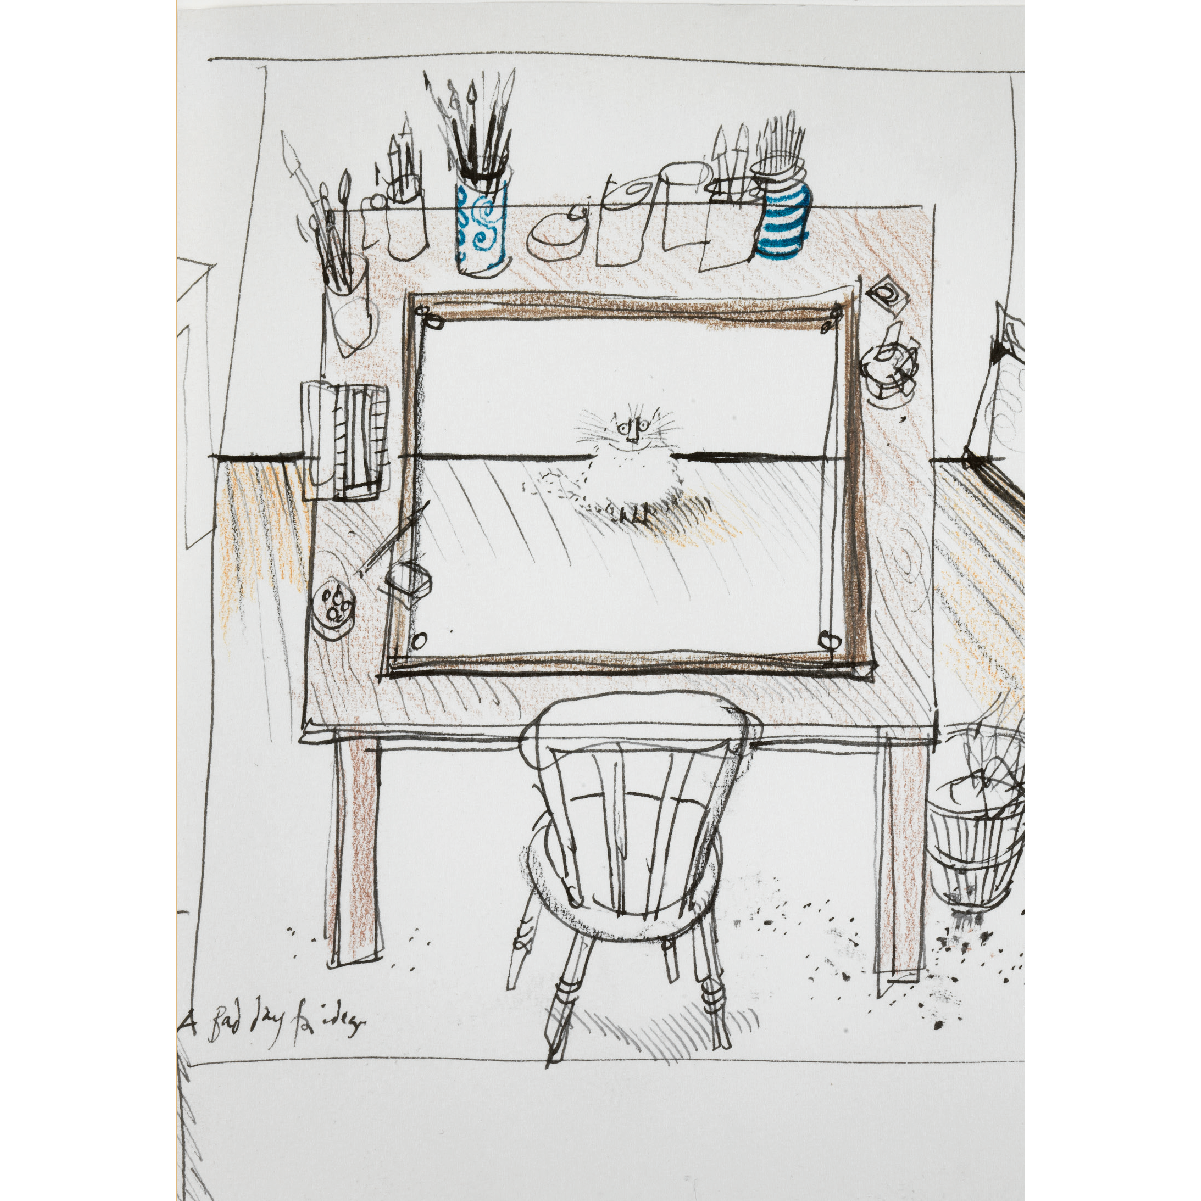 Greeting card - portrait format. Illustration by Ronald Searle: an artist's desk with pots of paintbrushes and pens, and a drawing of a cat on the paper. From the collection of The Fitzwilliam Museum, brought to you by CuratingCambridge.com